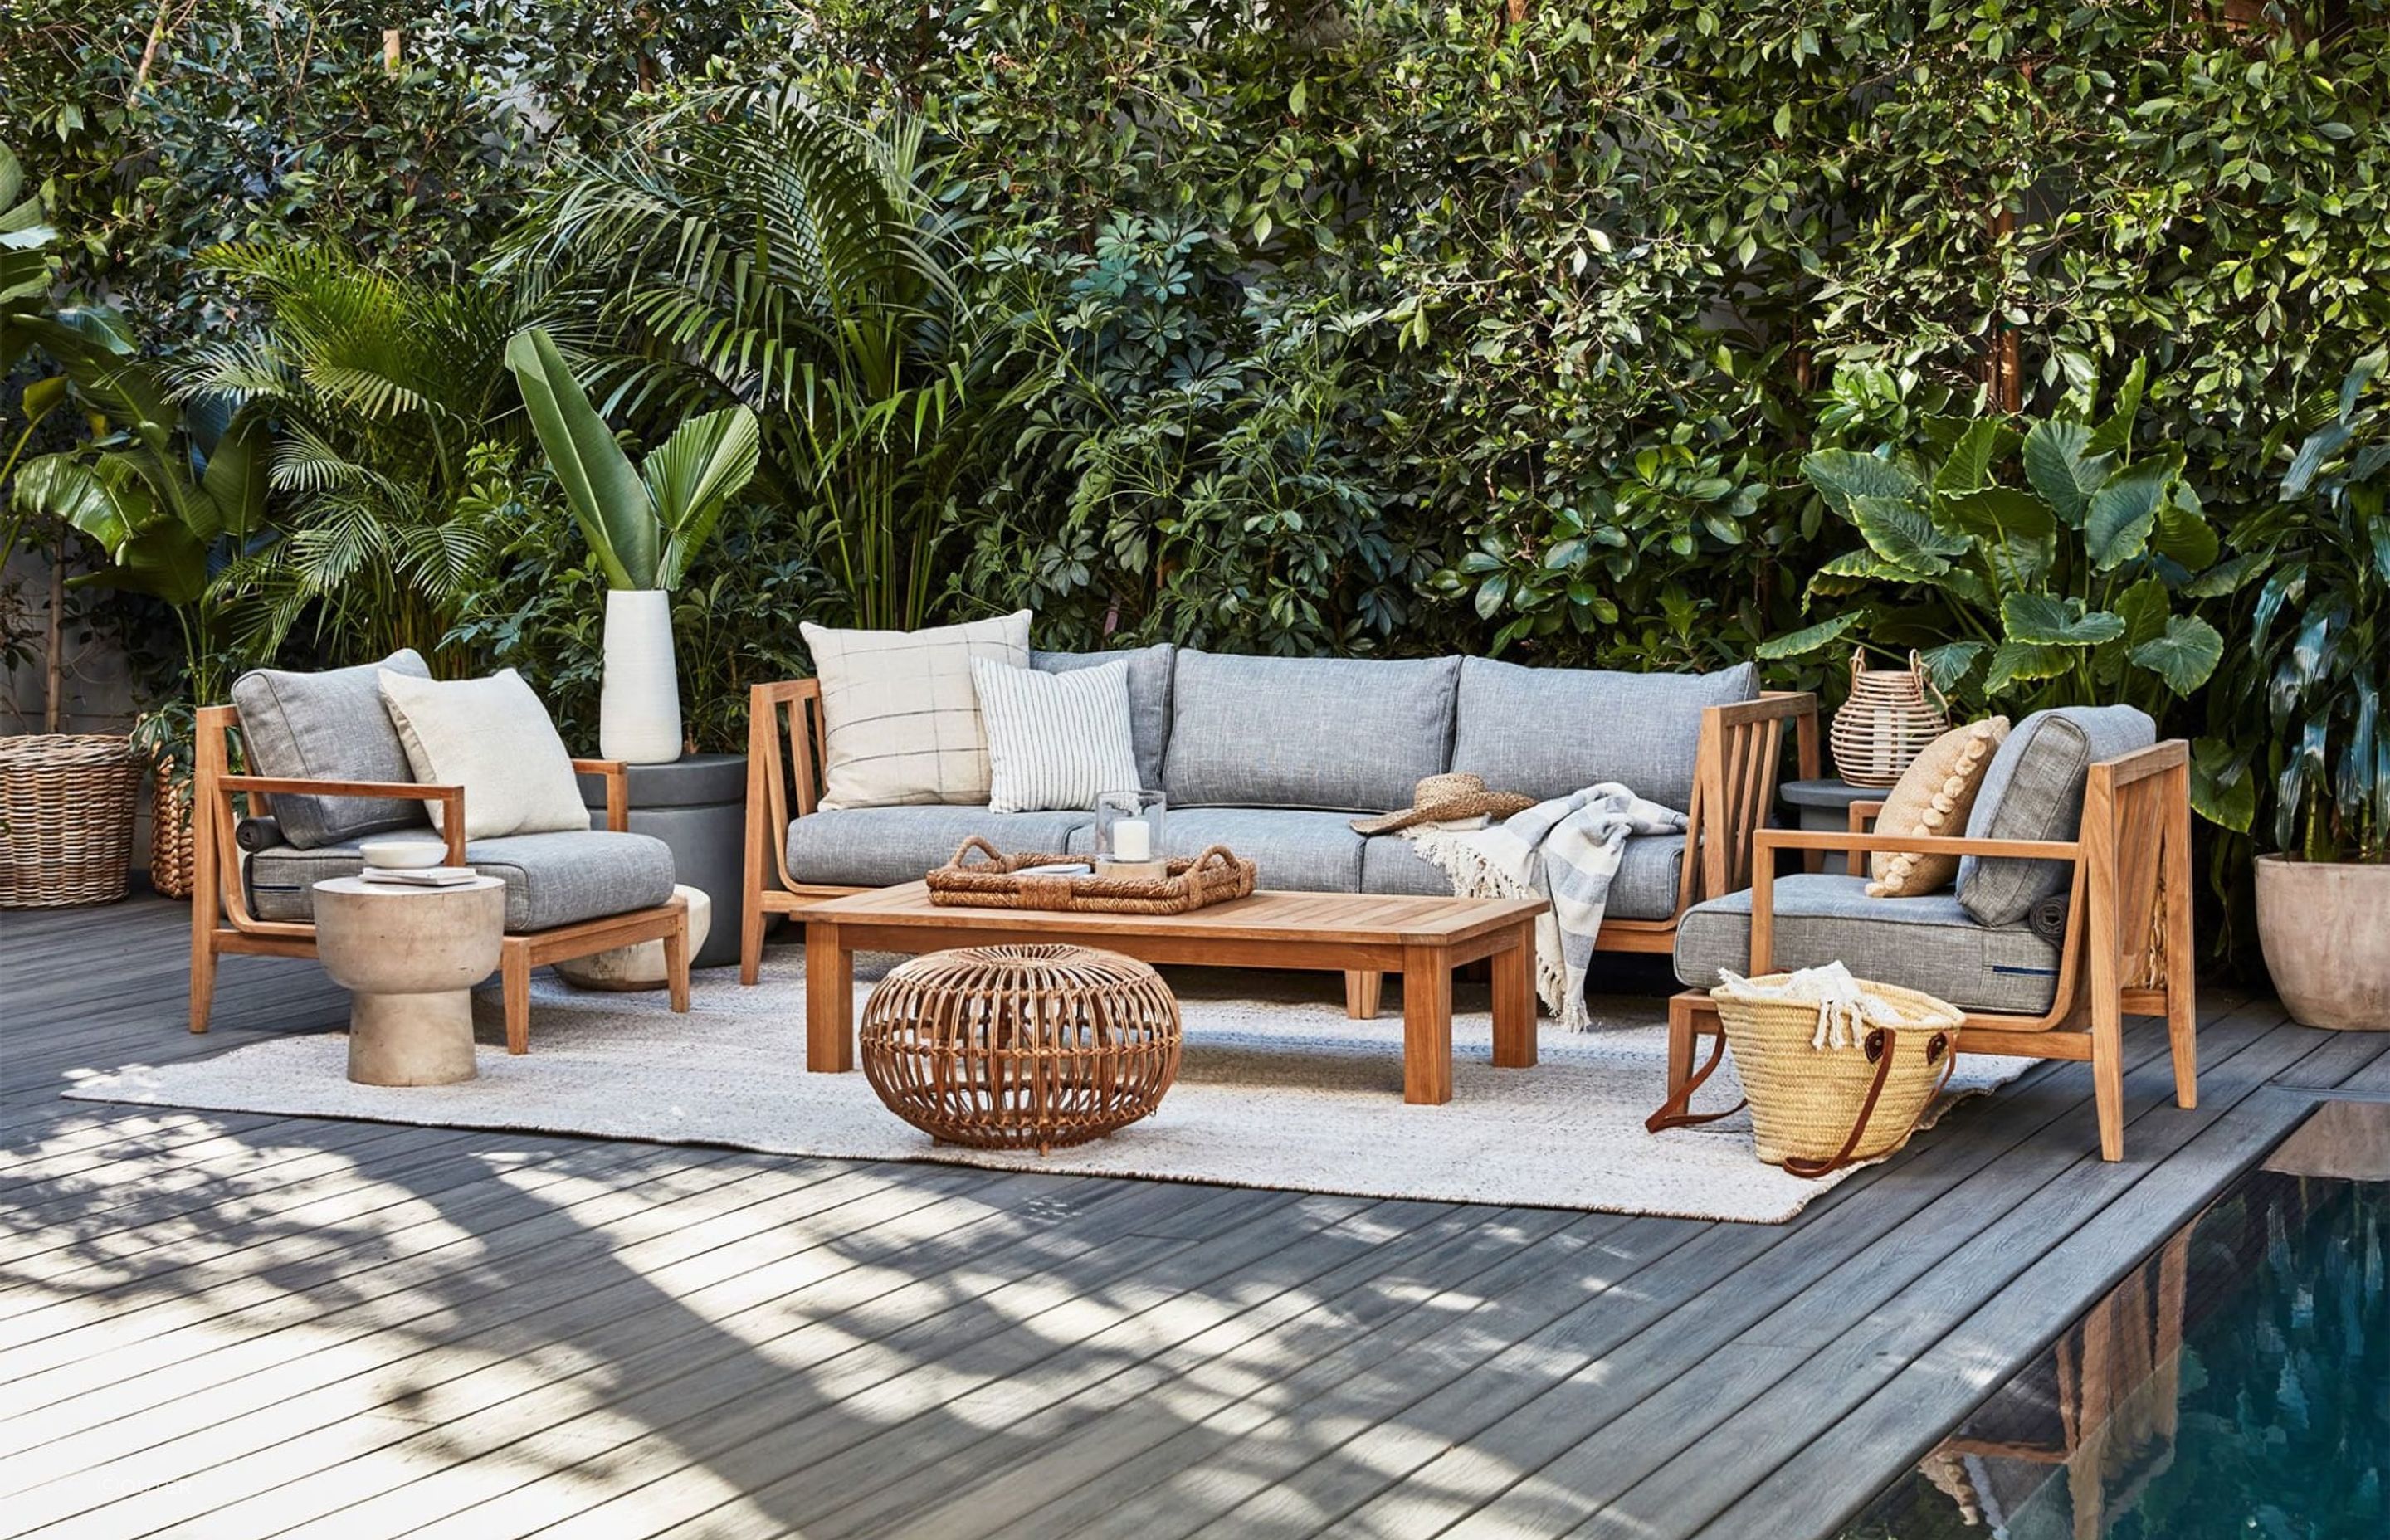 Outer’s modular A-Grade teak outdoor patio furniture is effortlessly inviting with its supremely comfortable memory foam cushions